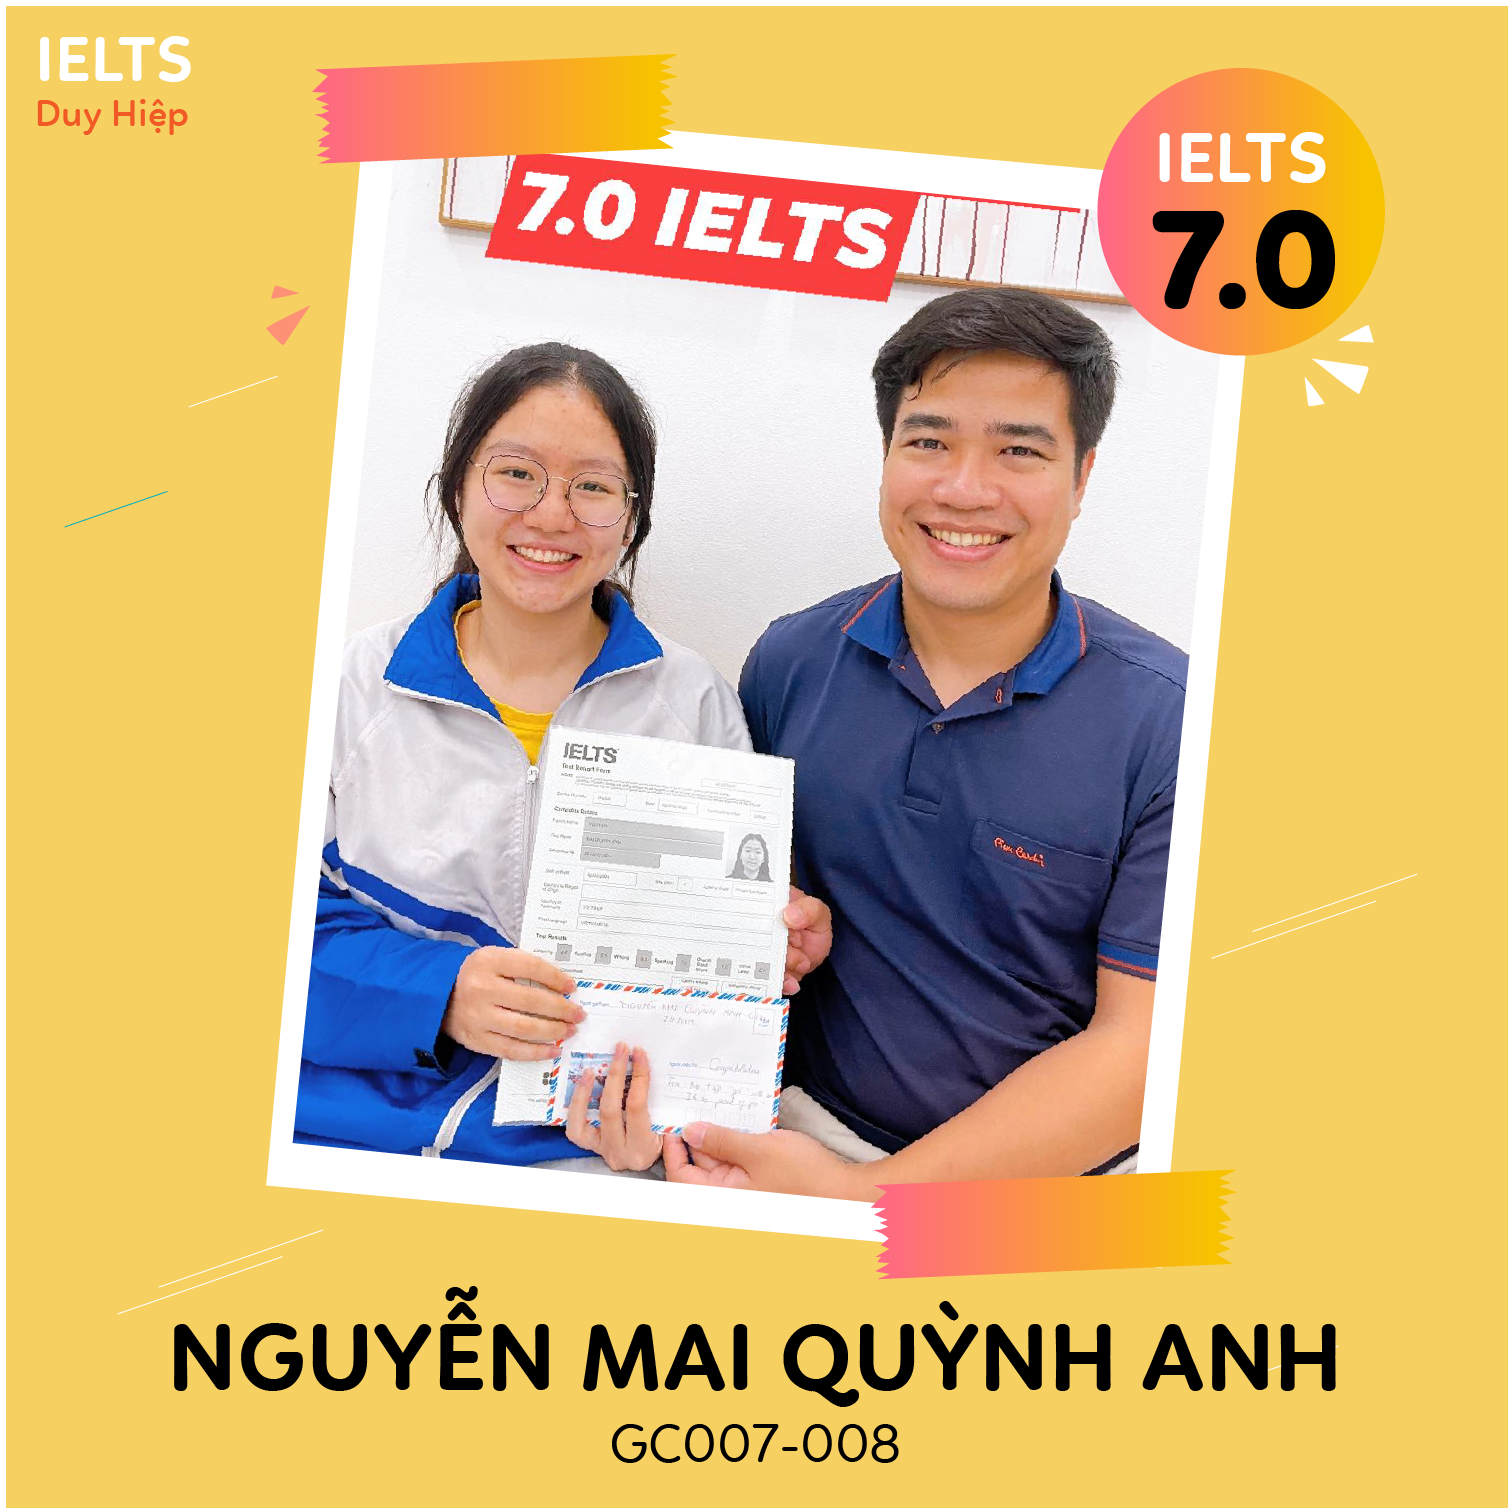 WALL OF FAME - Nguyễn Mai Quỳnh Anh 7.0 IELTS